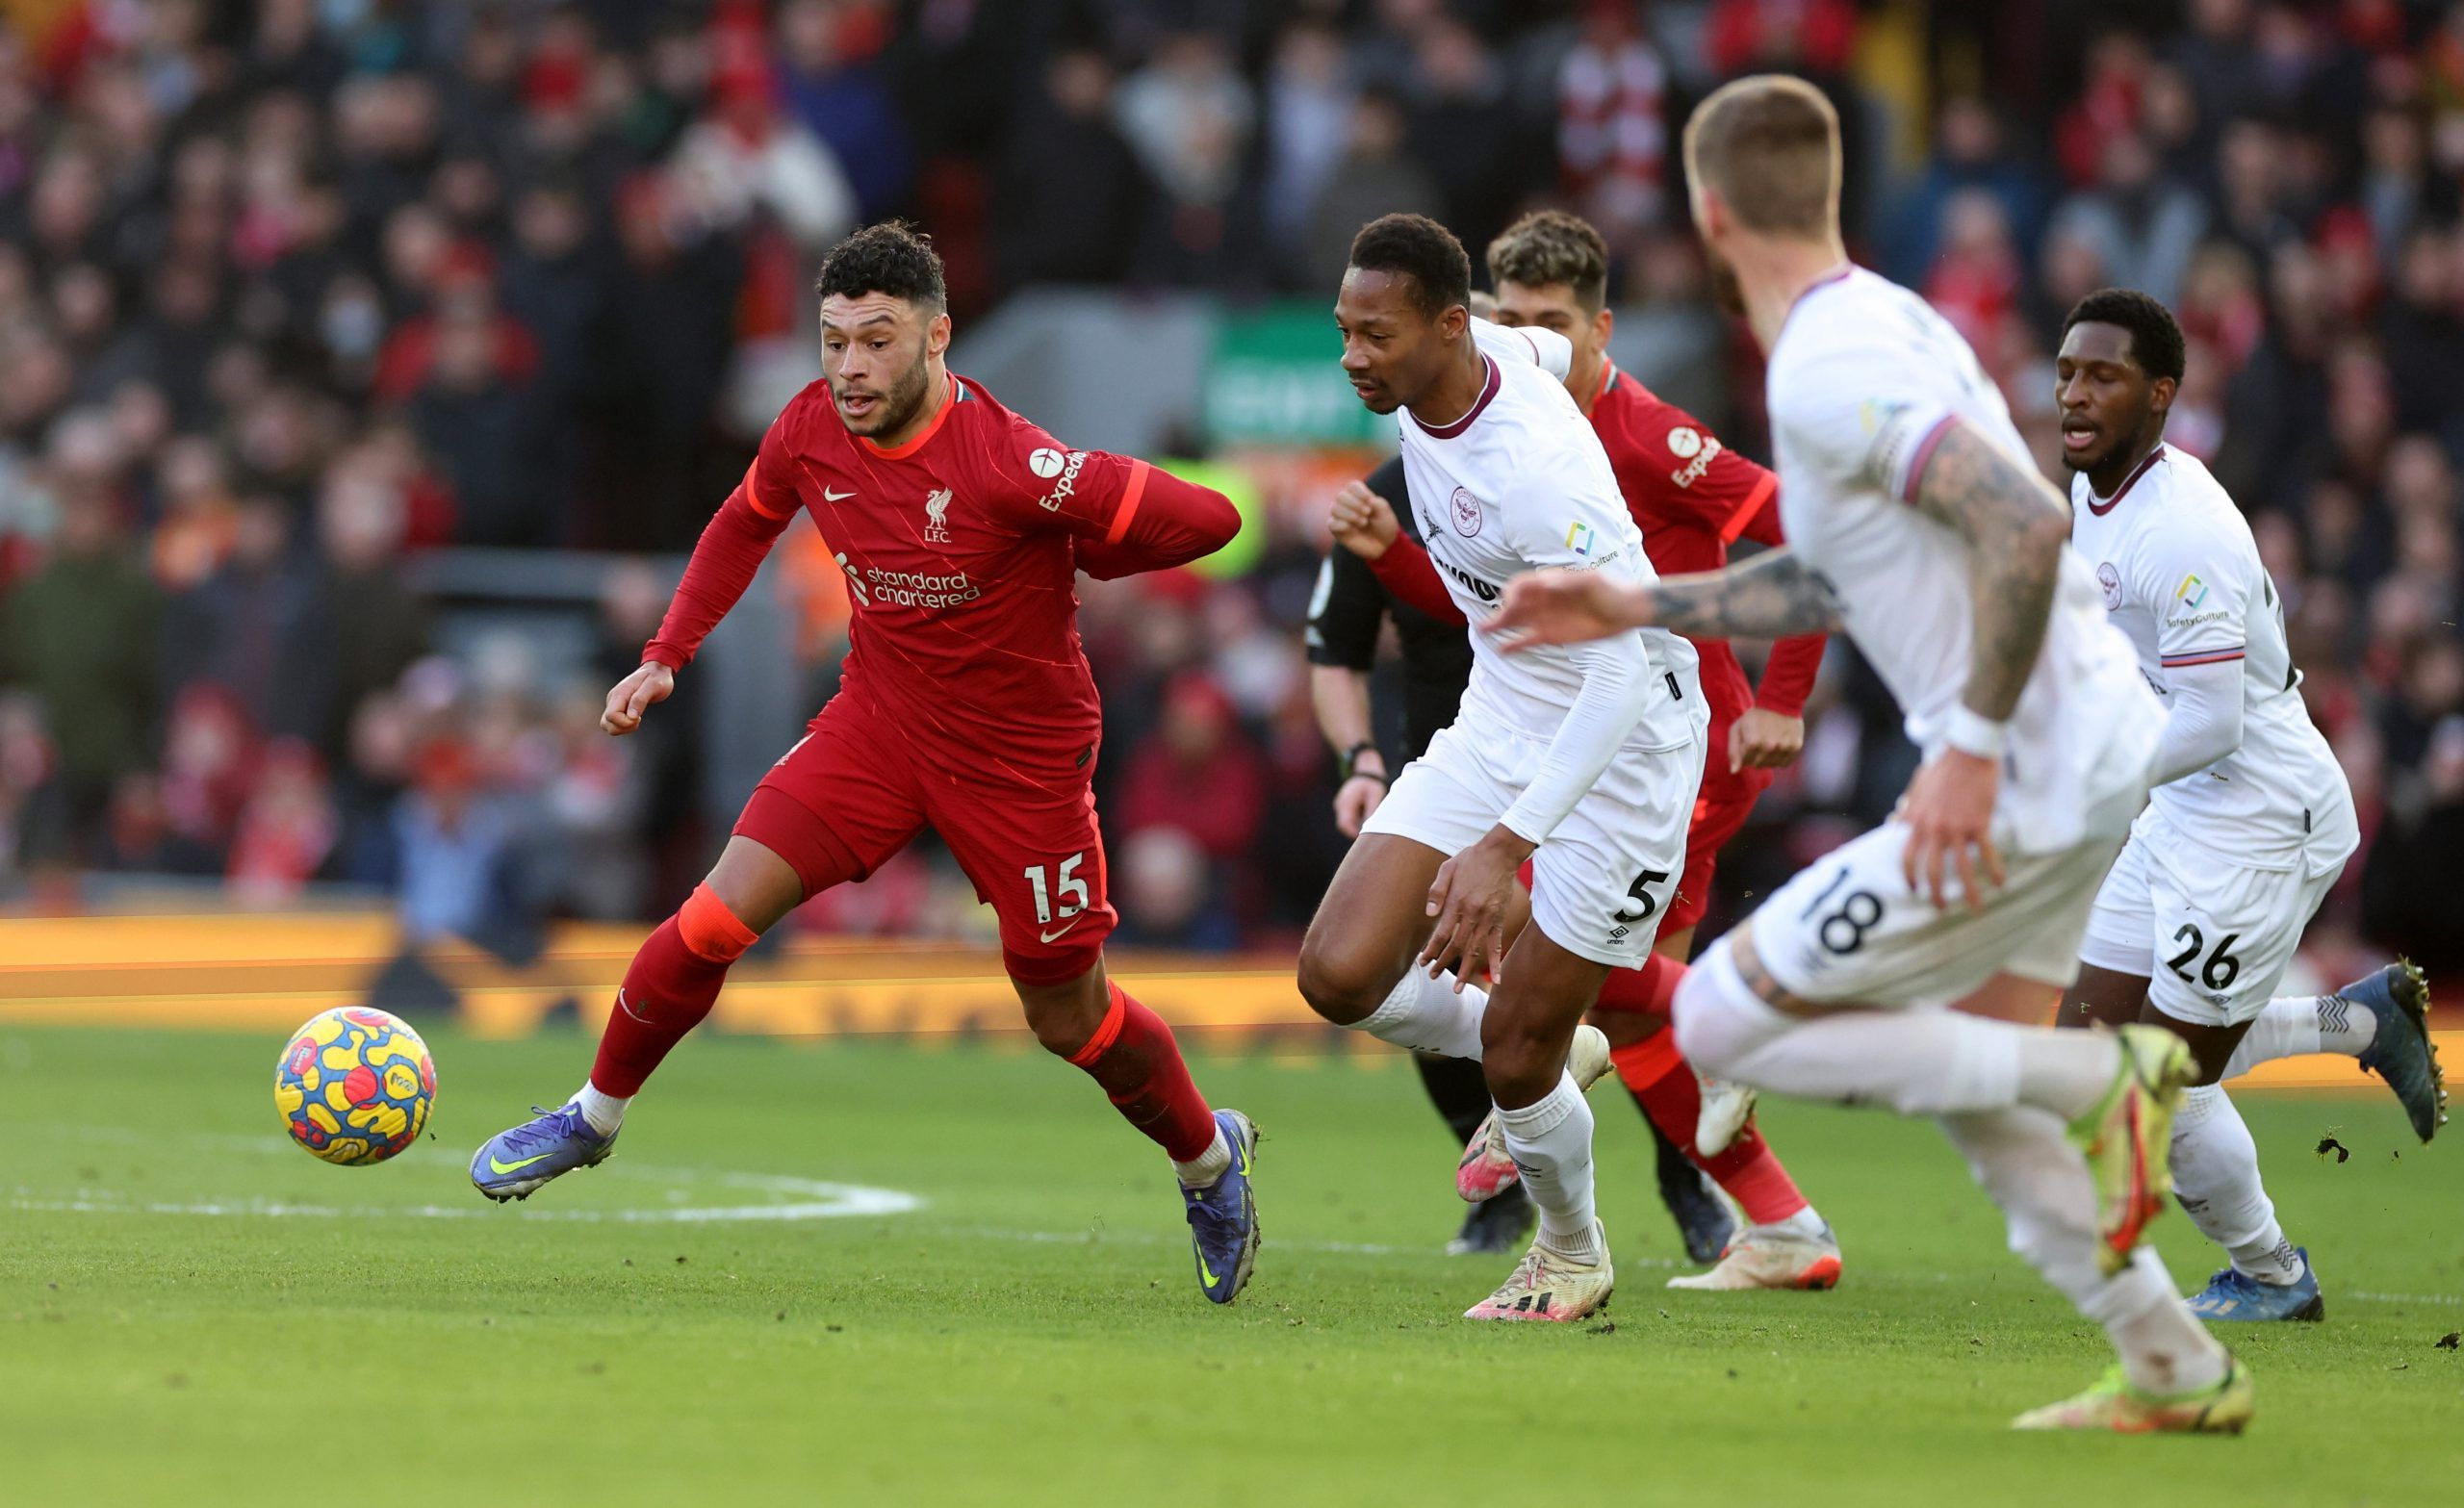 oxlade-chamberlain-liverpool-jurgen-klopp-liverpool-transfer-news-manchester-united-oxlade-chamberlain-transfer-news-erik-ten-hag-latest-rebuild-midfielderSoccer Football - Premier League - Liverpool v Brentford - Anfield, Liverpool, Britain - January 16, 2022 Liverpool's Alex Oxlade-Chamberlain in action with Brentford's Ethan Pinnock and Shandon Baptiste REUTERS/Phil Noble EDITORIAL USE ONLY. No use with unauthorized audio, video, data, fixture lists, club/league logos or 'live' services. Onli